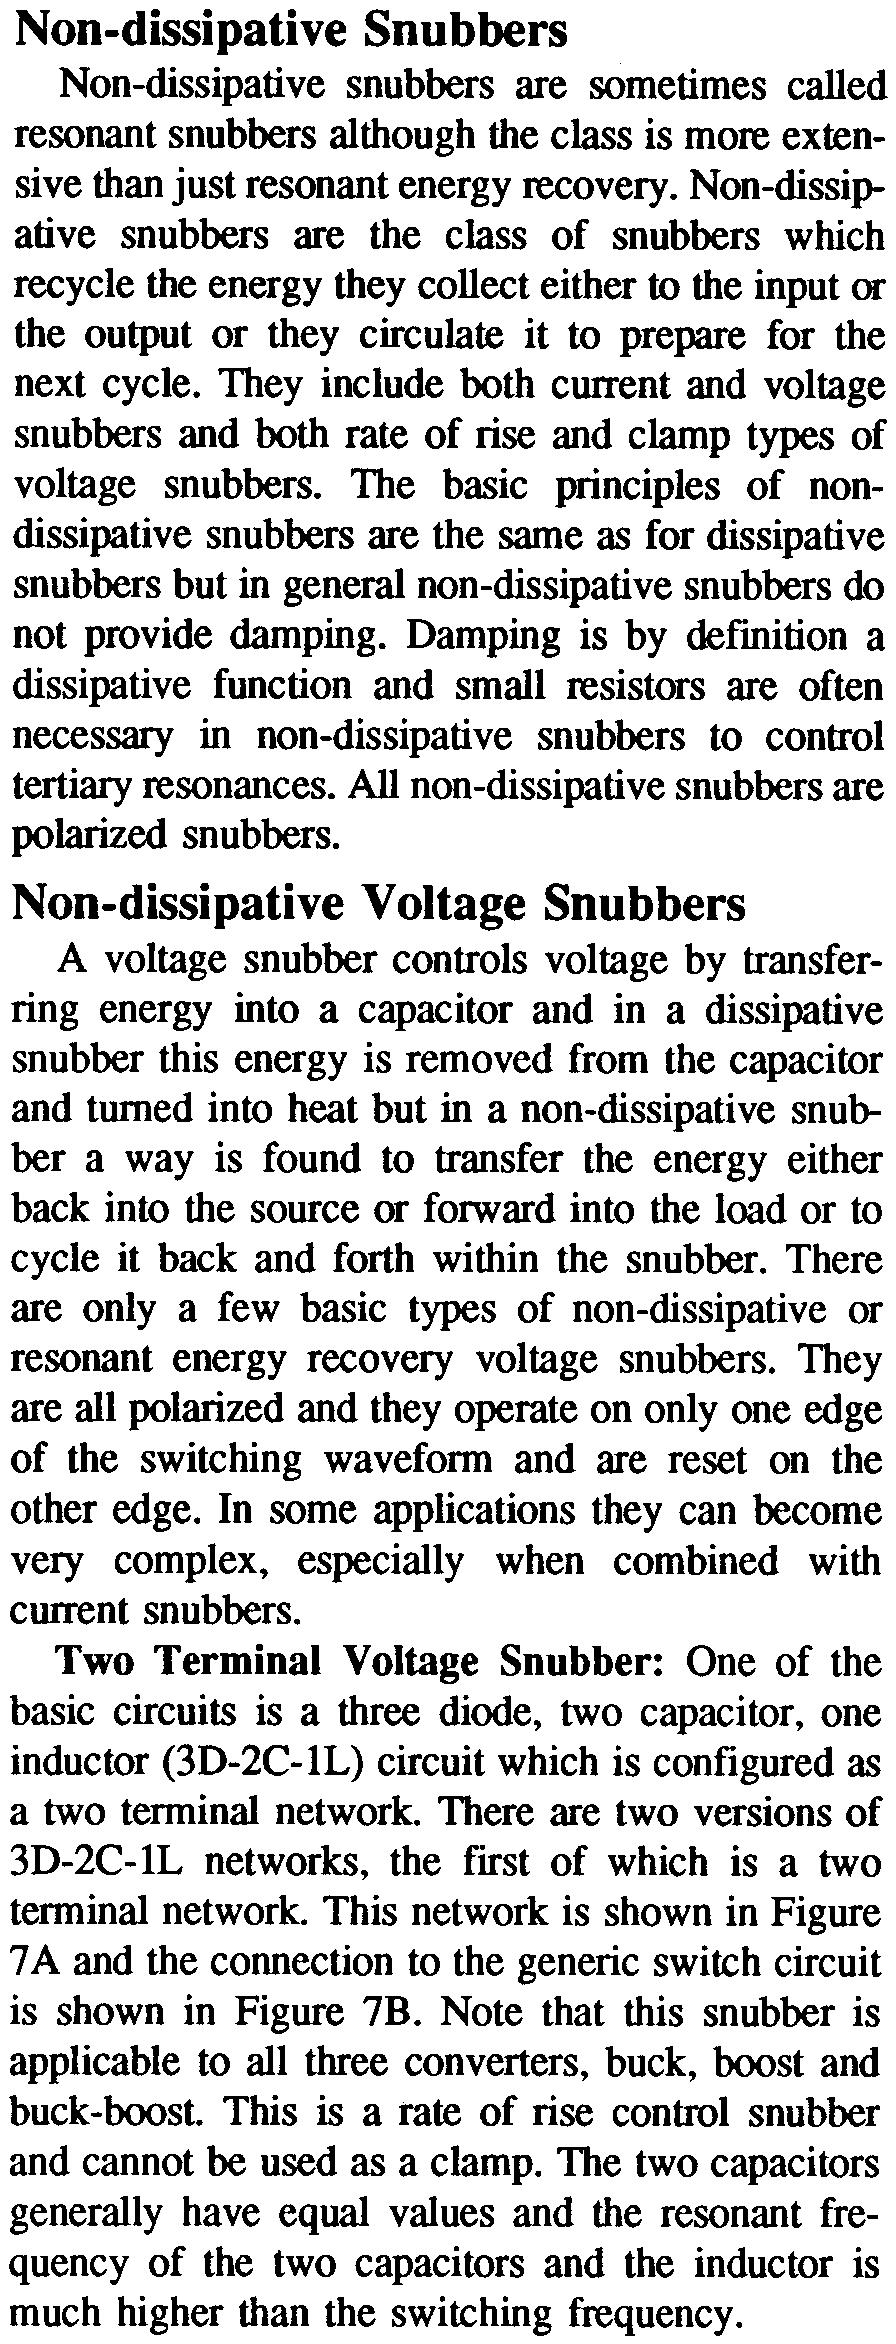 Non-dissipative Snubbers Non-dissipative snubbers are sometimes called resonant snubbers although the class is more extensive than just resonant energy recovery.